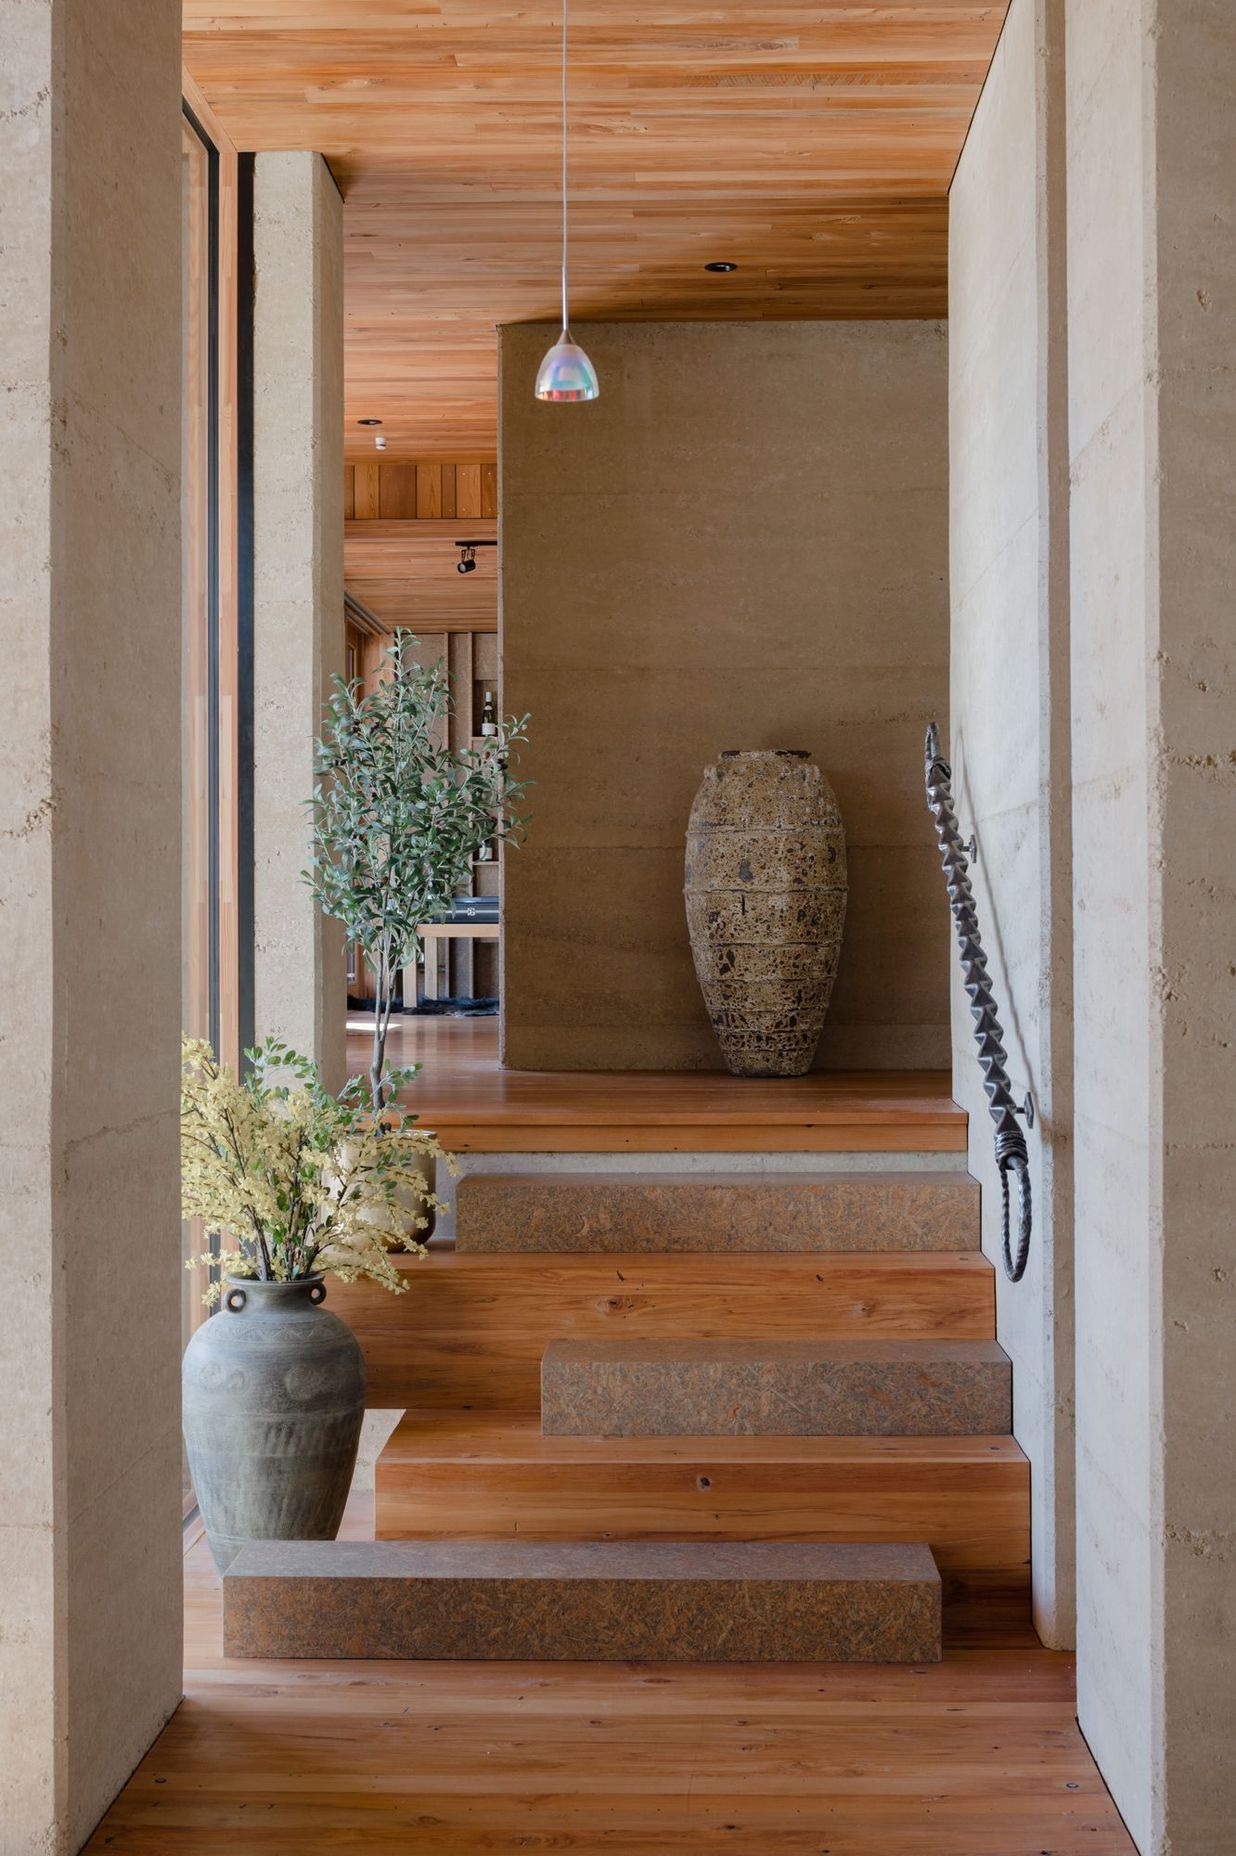 Strand board elements can be found throughout the home, in this instance as every second stair.